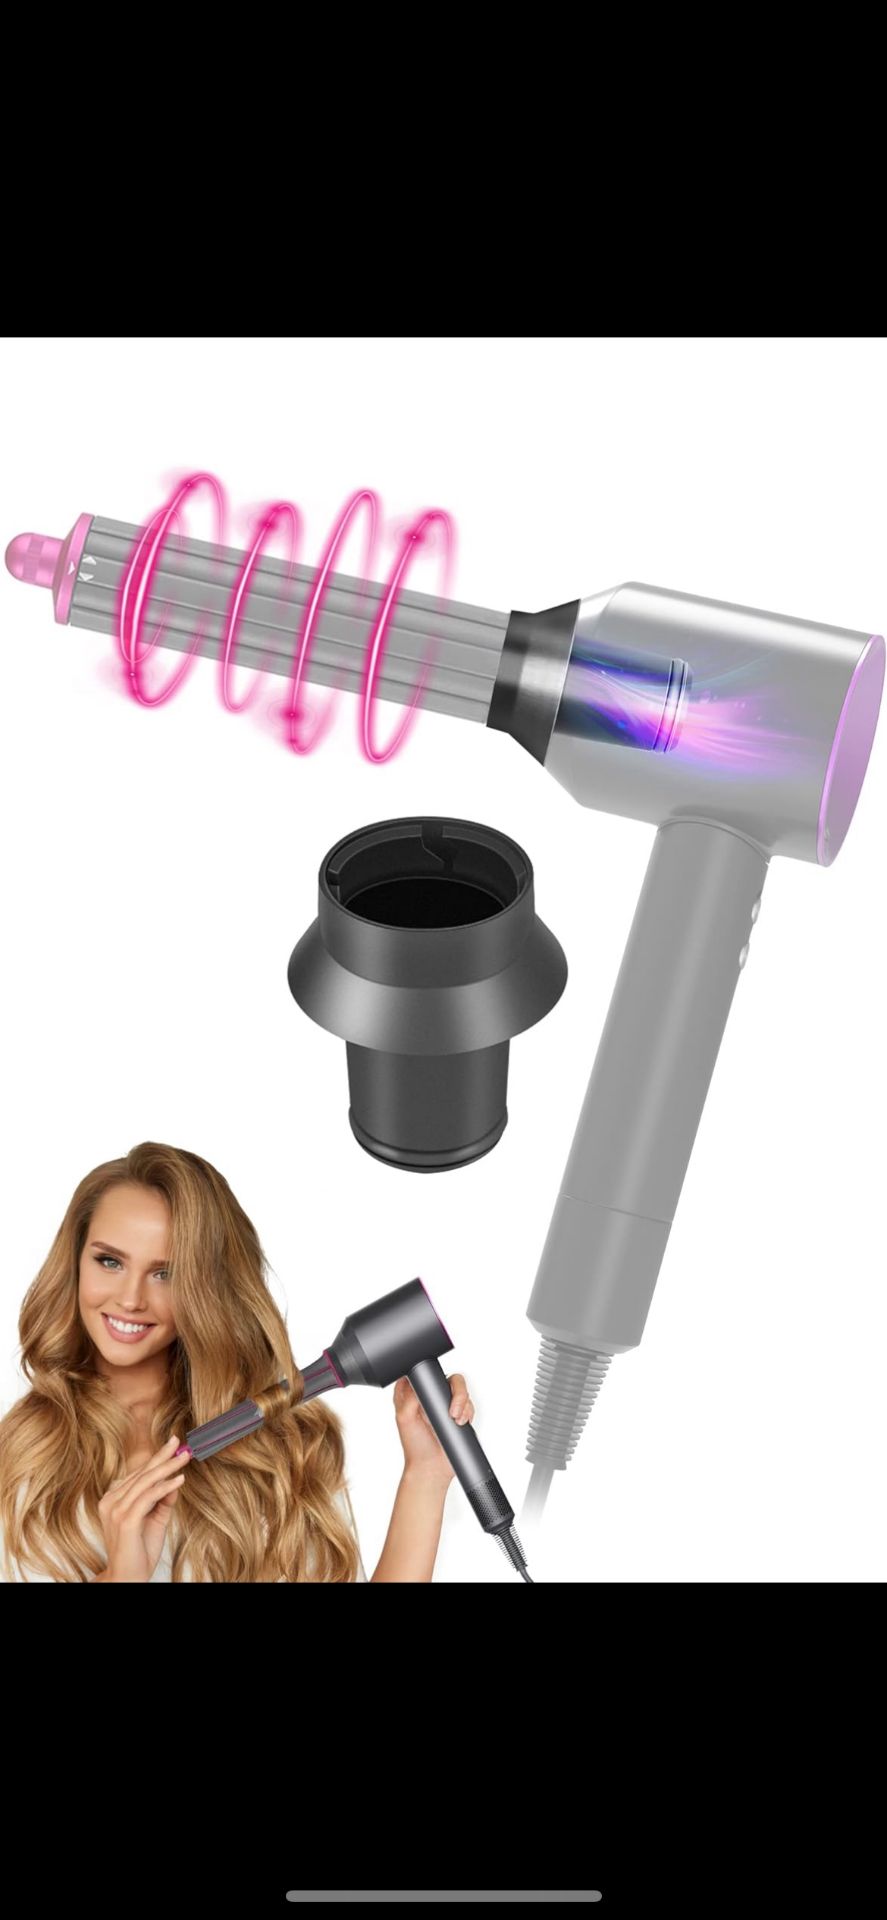 15 x Multifunctional 2in1 Hairdryer Accessory, Compatible with Dyson Supersonic